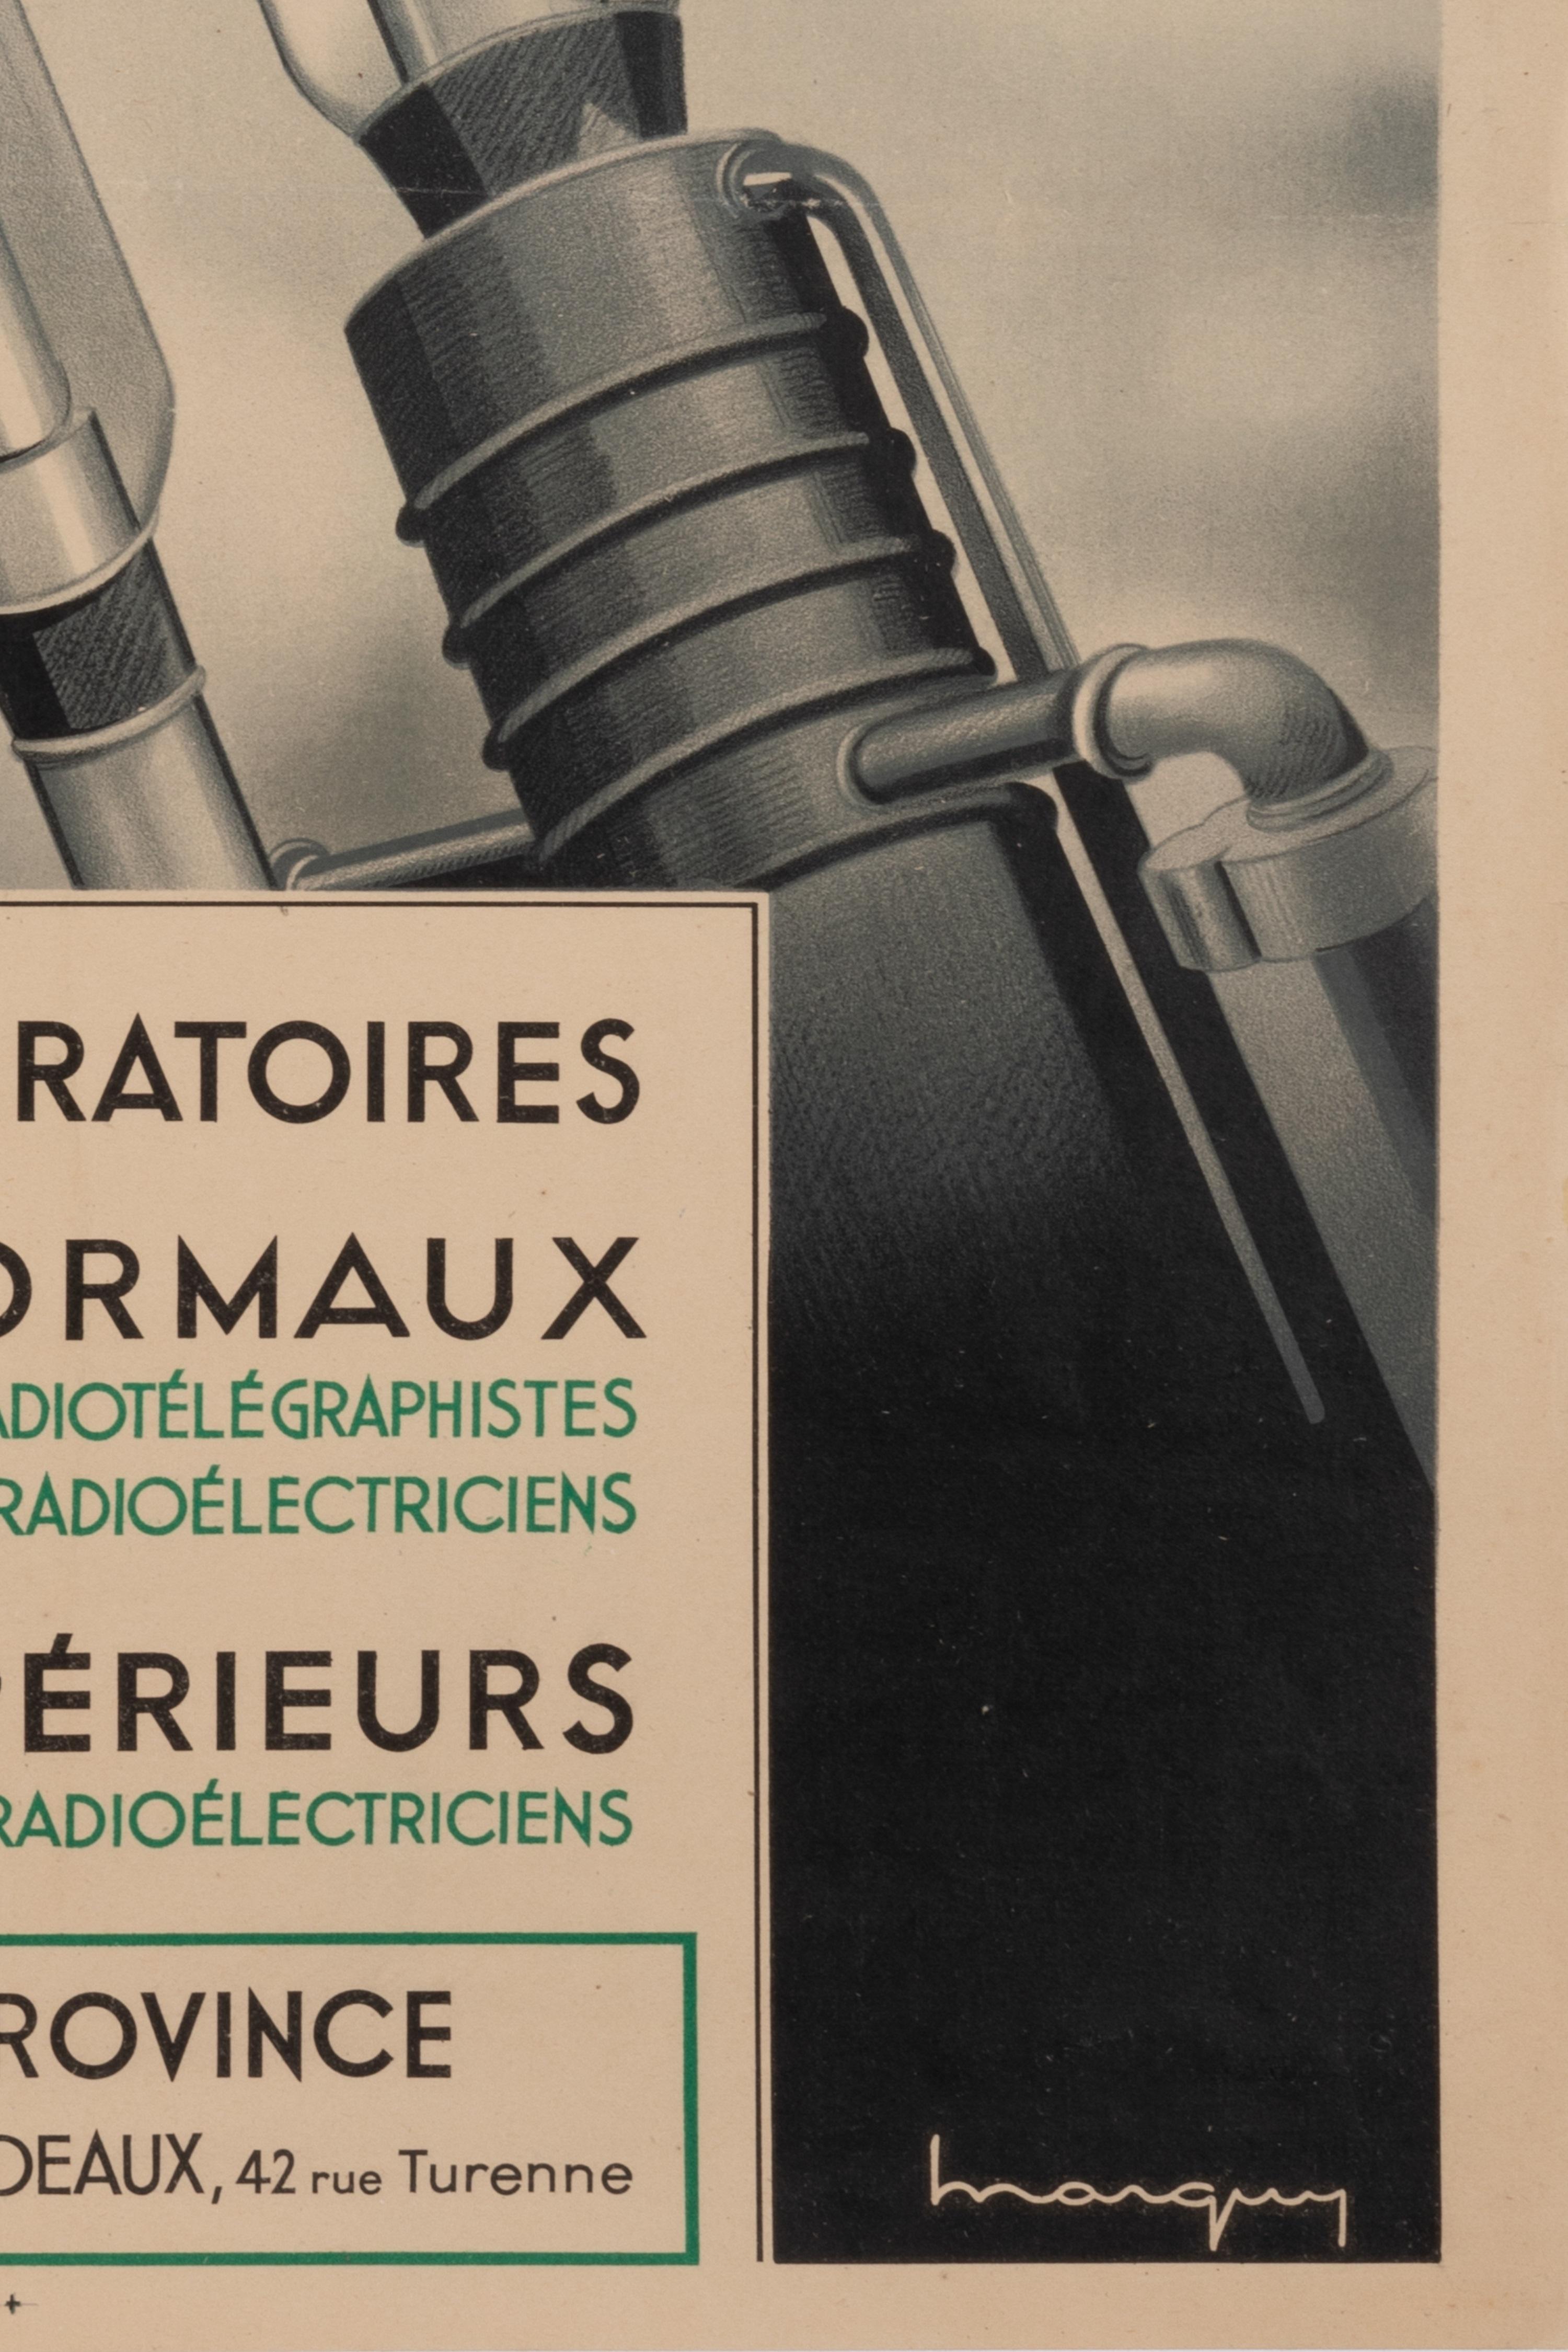 Poster of the French School of Radioelectricity created by the artist Marguy around 1950.

Artist: Marguy
Title: Ecole Française de Radioélectricité
Date: circa 1950
Size: 23.6 x 29.9 in / 60 x 76 cm
Printer : Publicité Rapy
Materials and